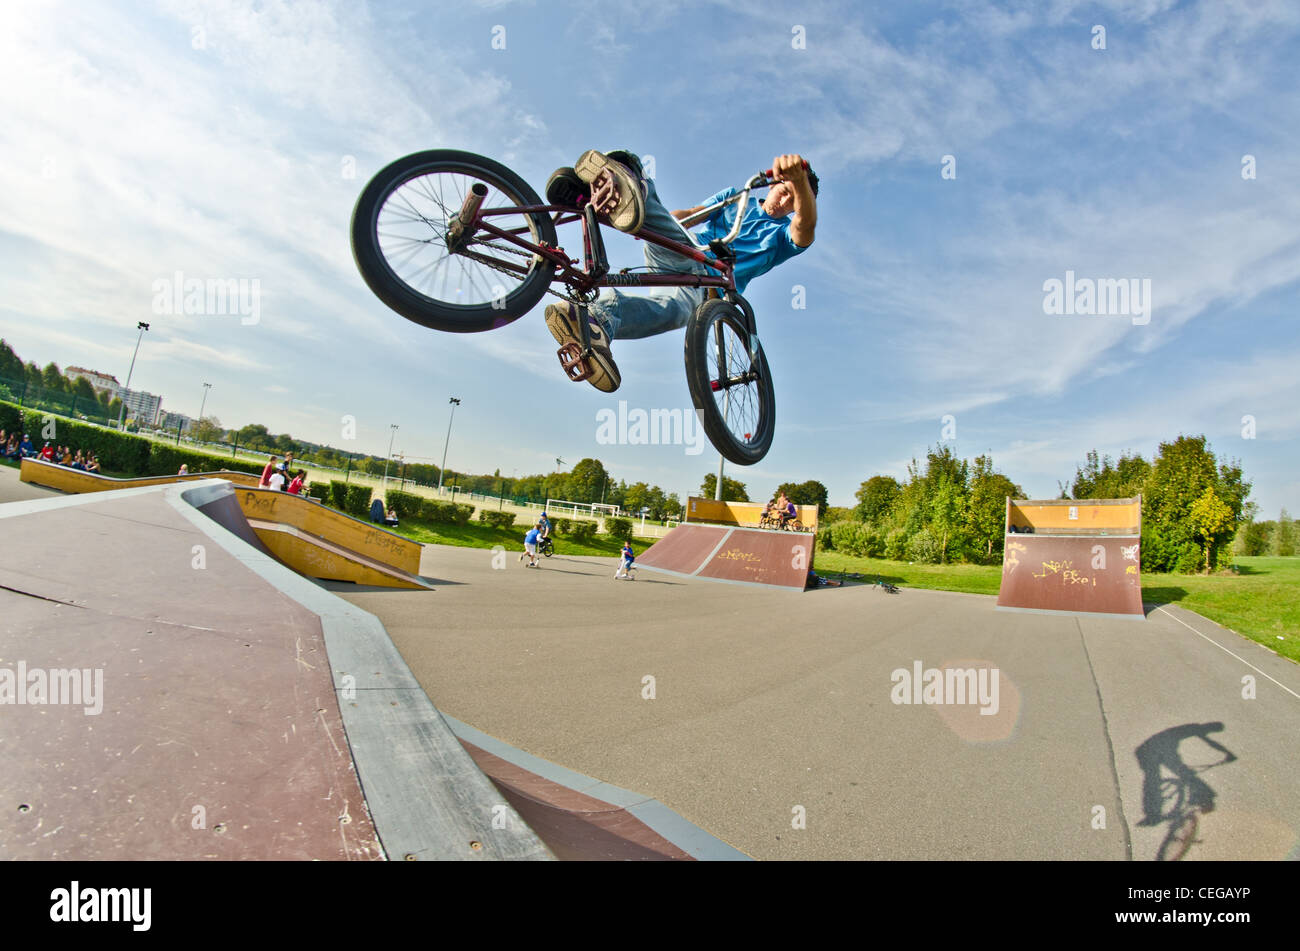 bmx france lookback air aerial b m x skate parc sky in the air shooes jeans sport extreme Stock Photo